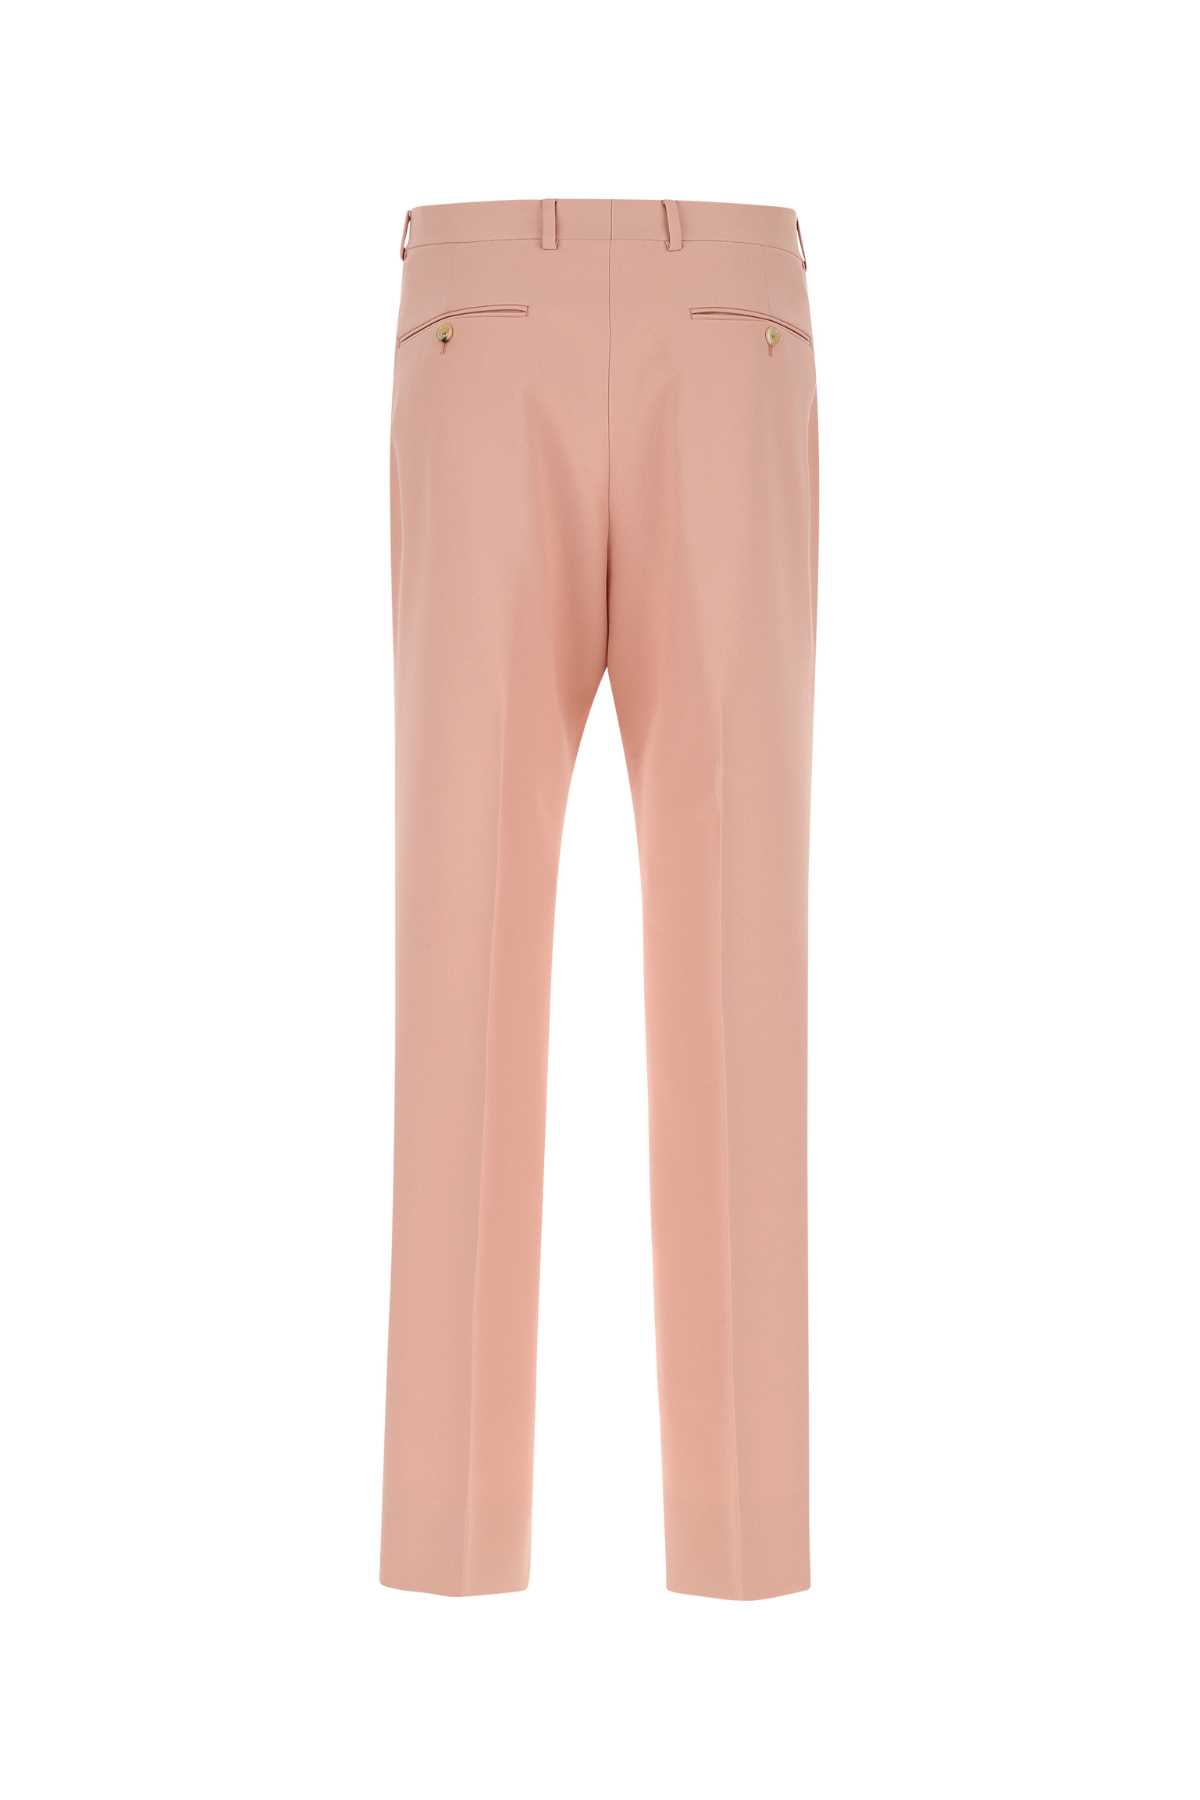 Gucci Pastel Pink Polyester Pant In 5859